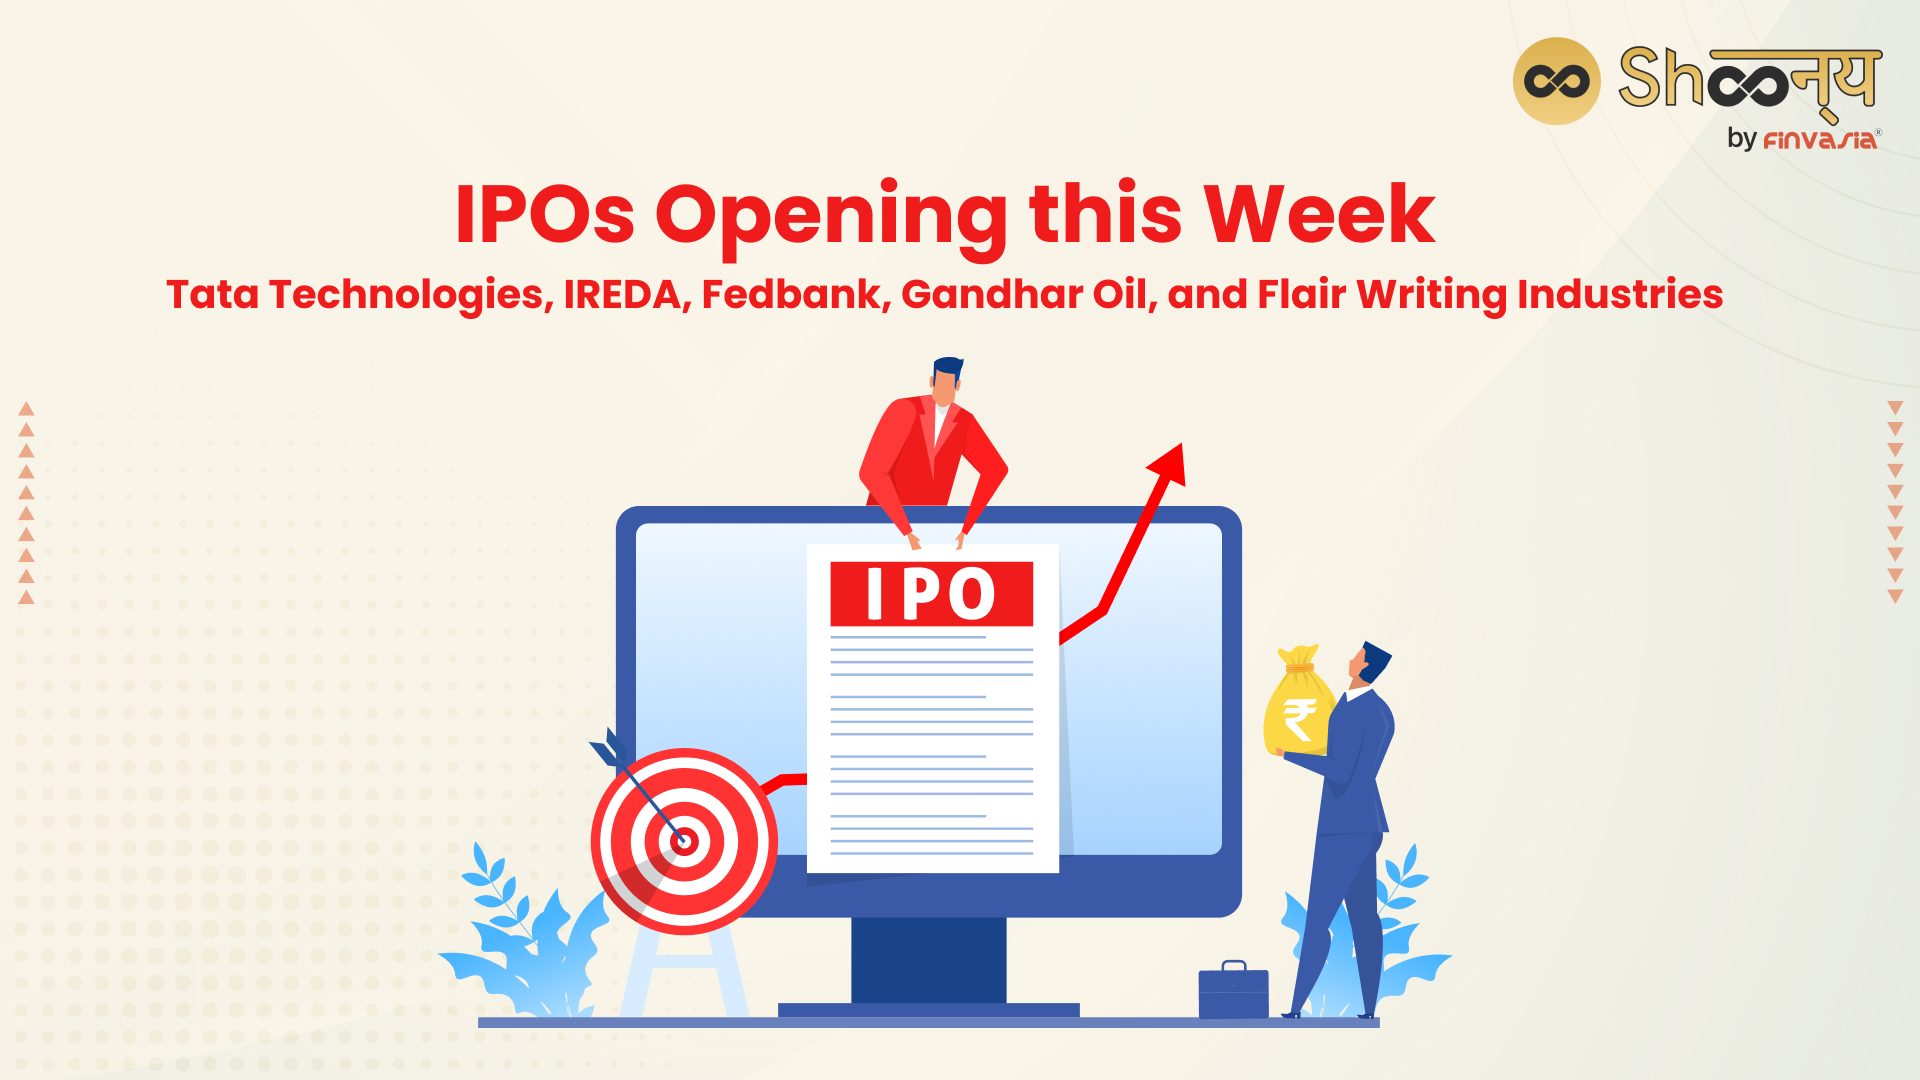 IPOs Opening This Week: Tata Technologies, IREDA, and More